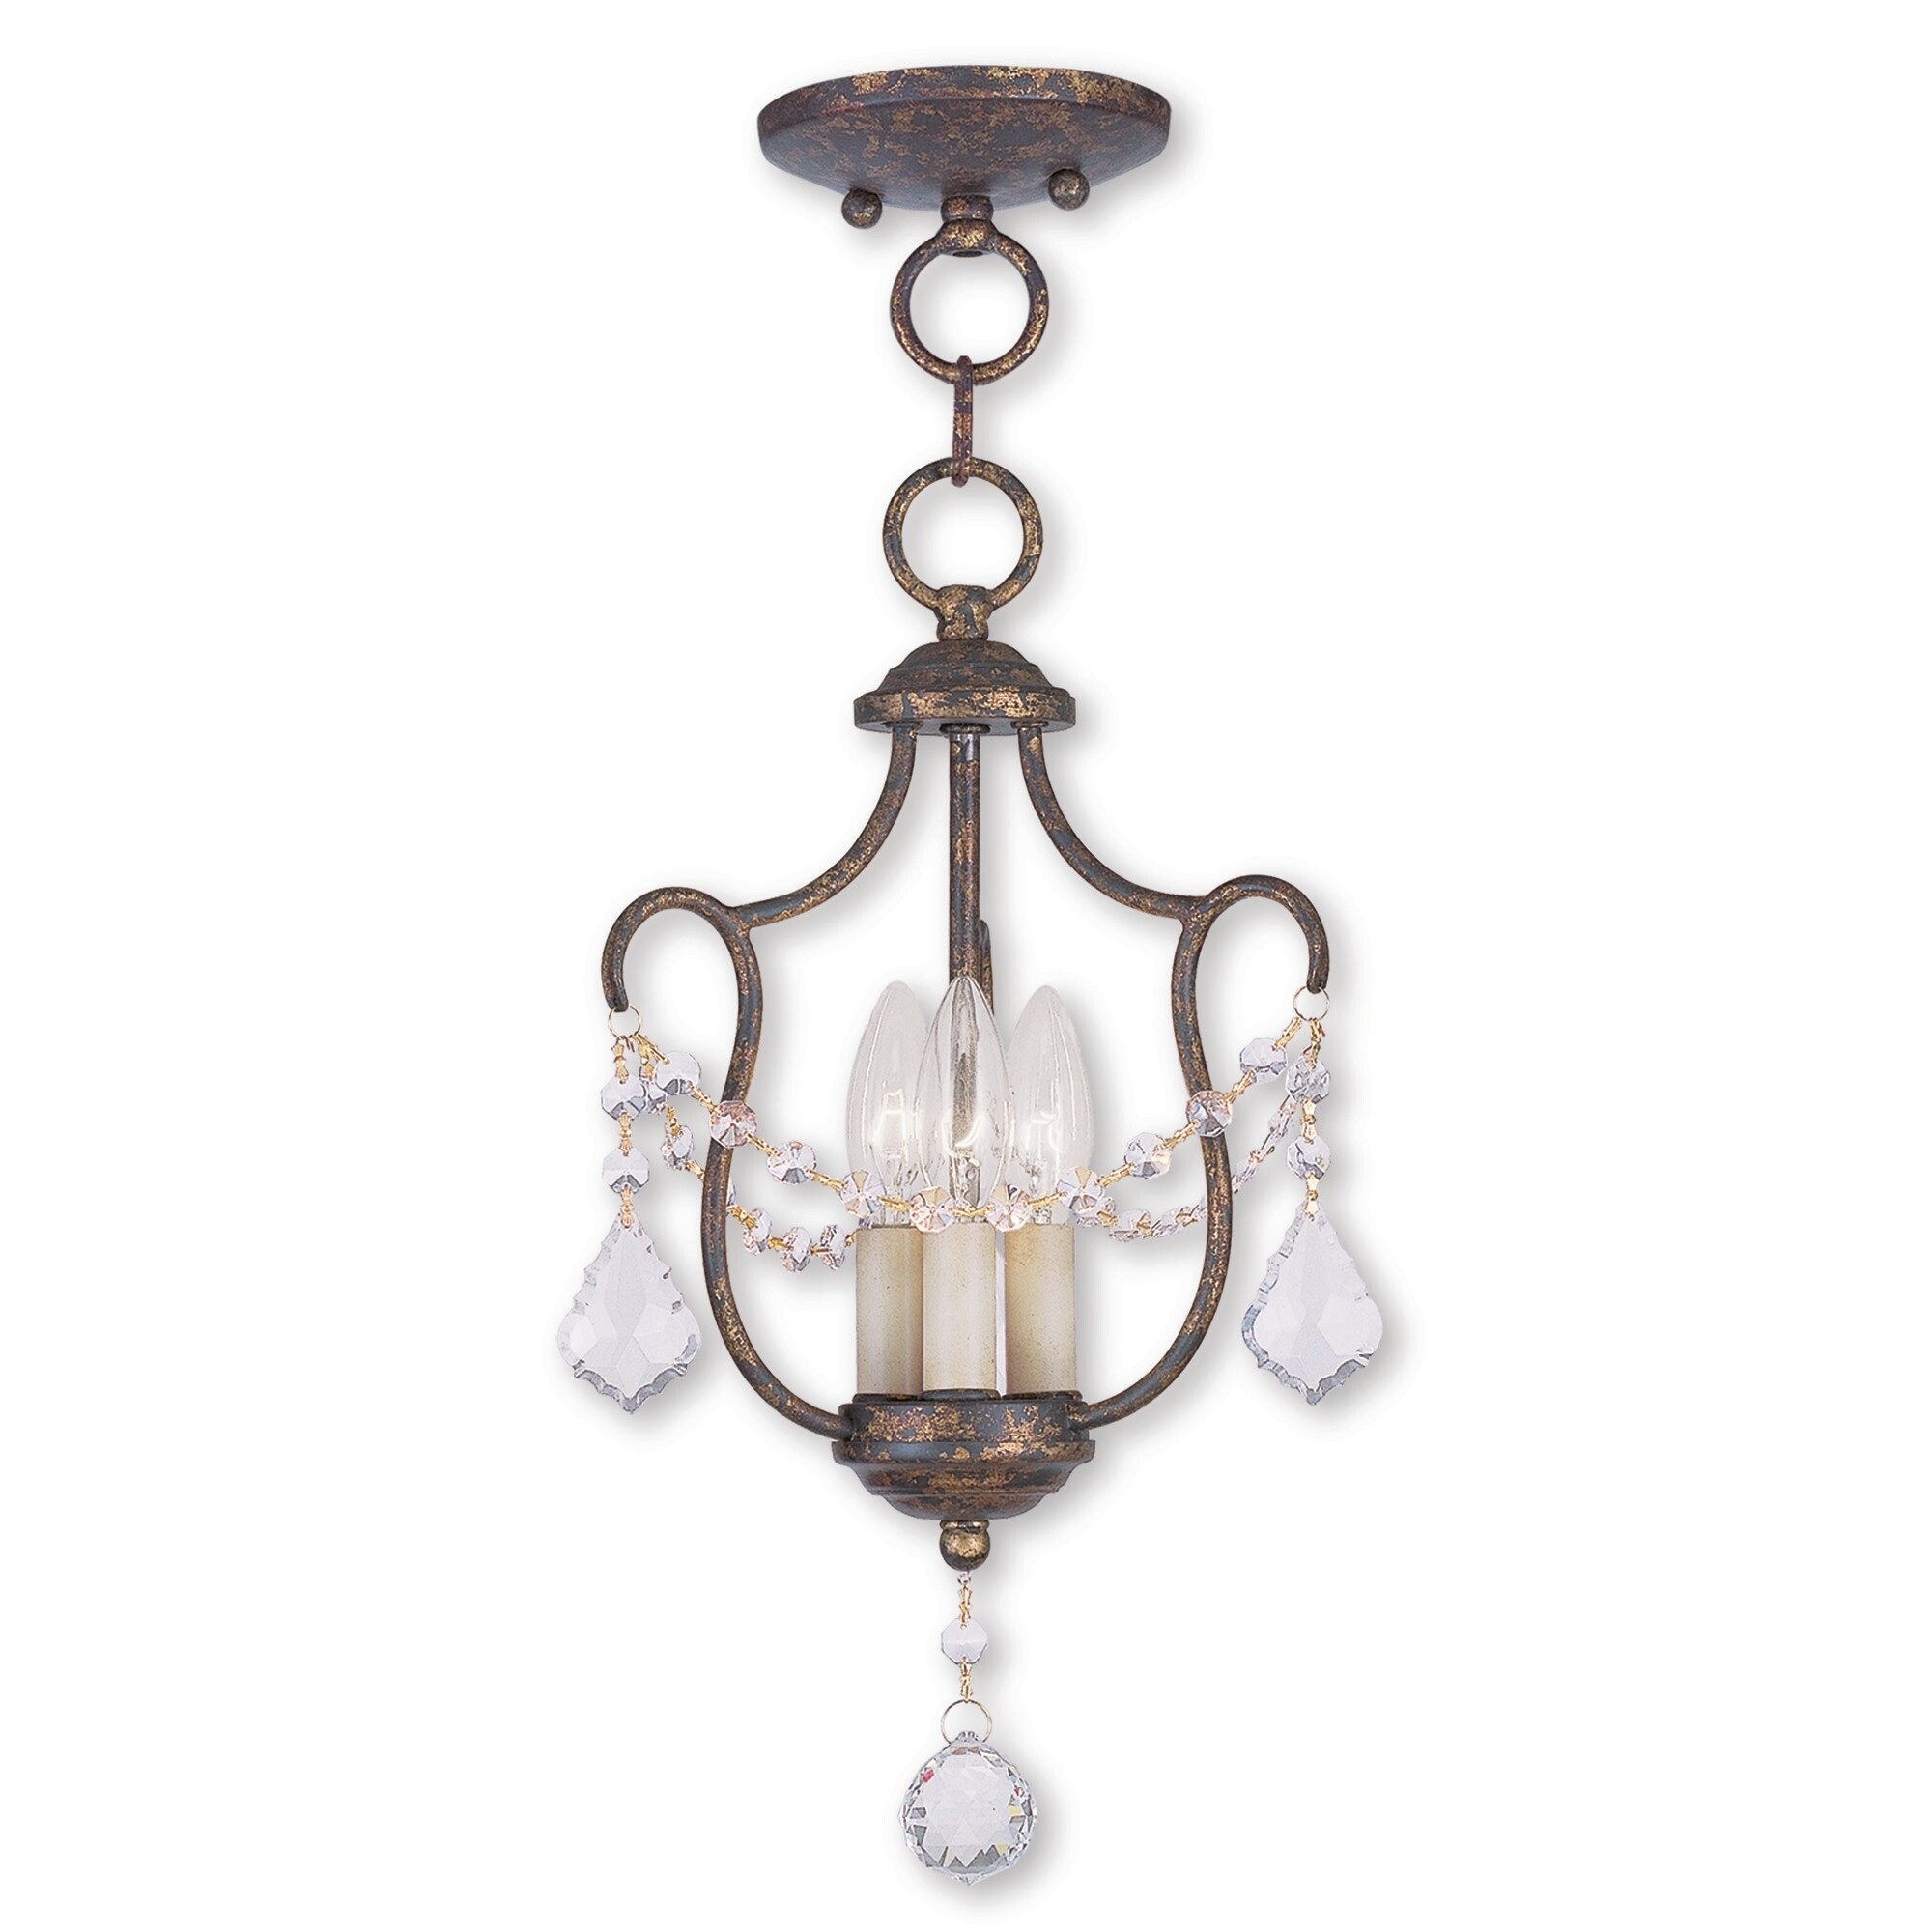 Modern Crystal Chandeliers Lighting Pendant Ceiling Lamp with 3